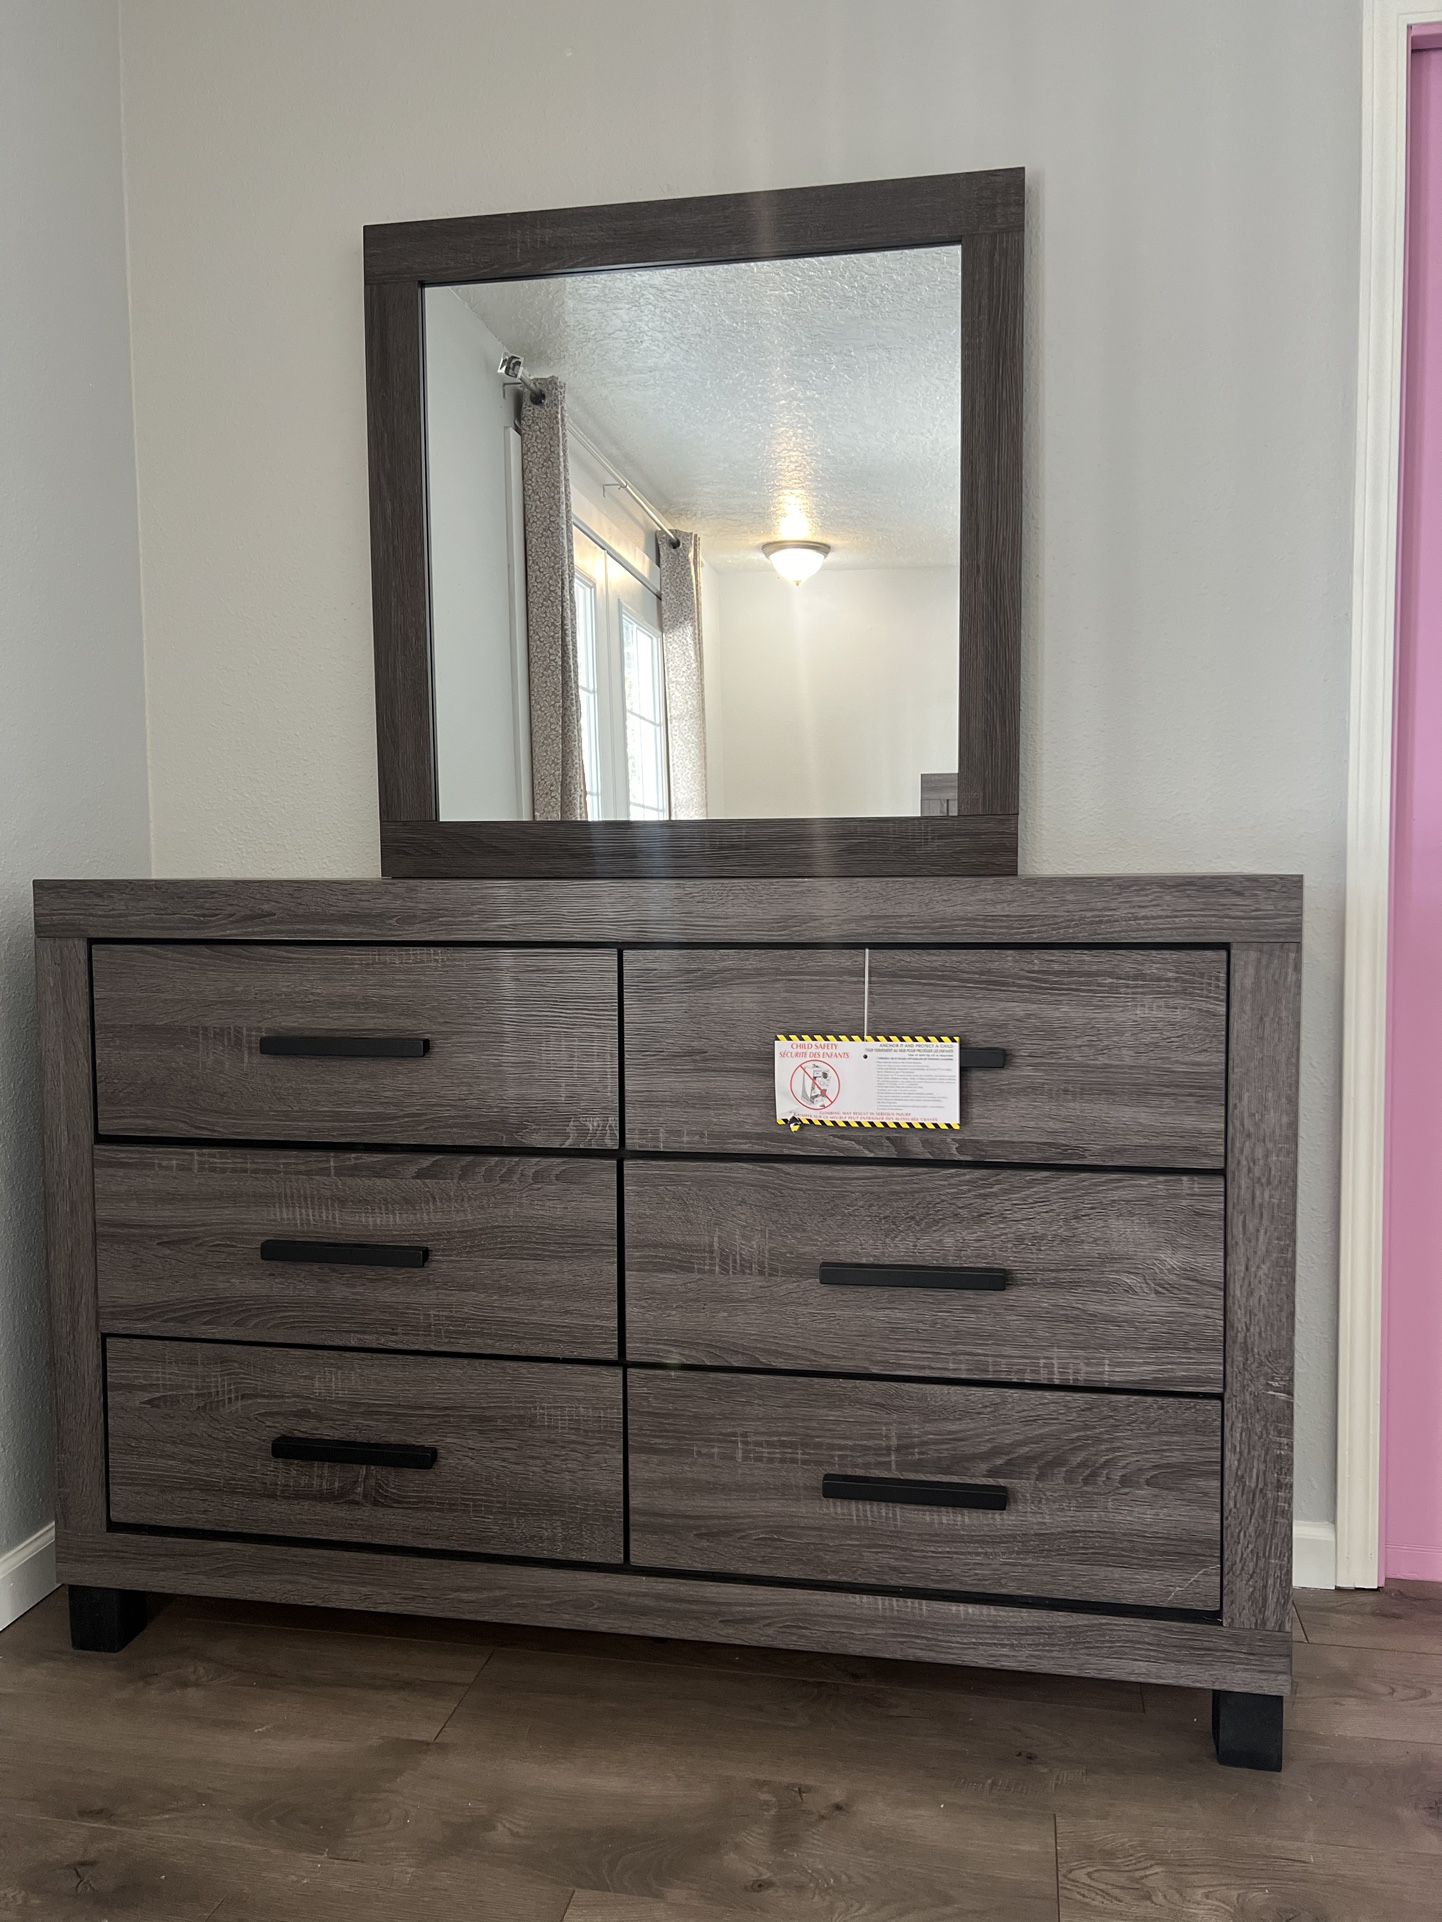 Gray Dresser color with Mirror. Like New 80